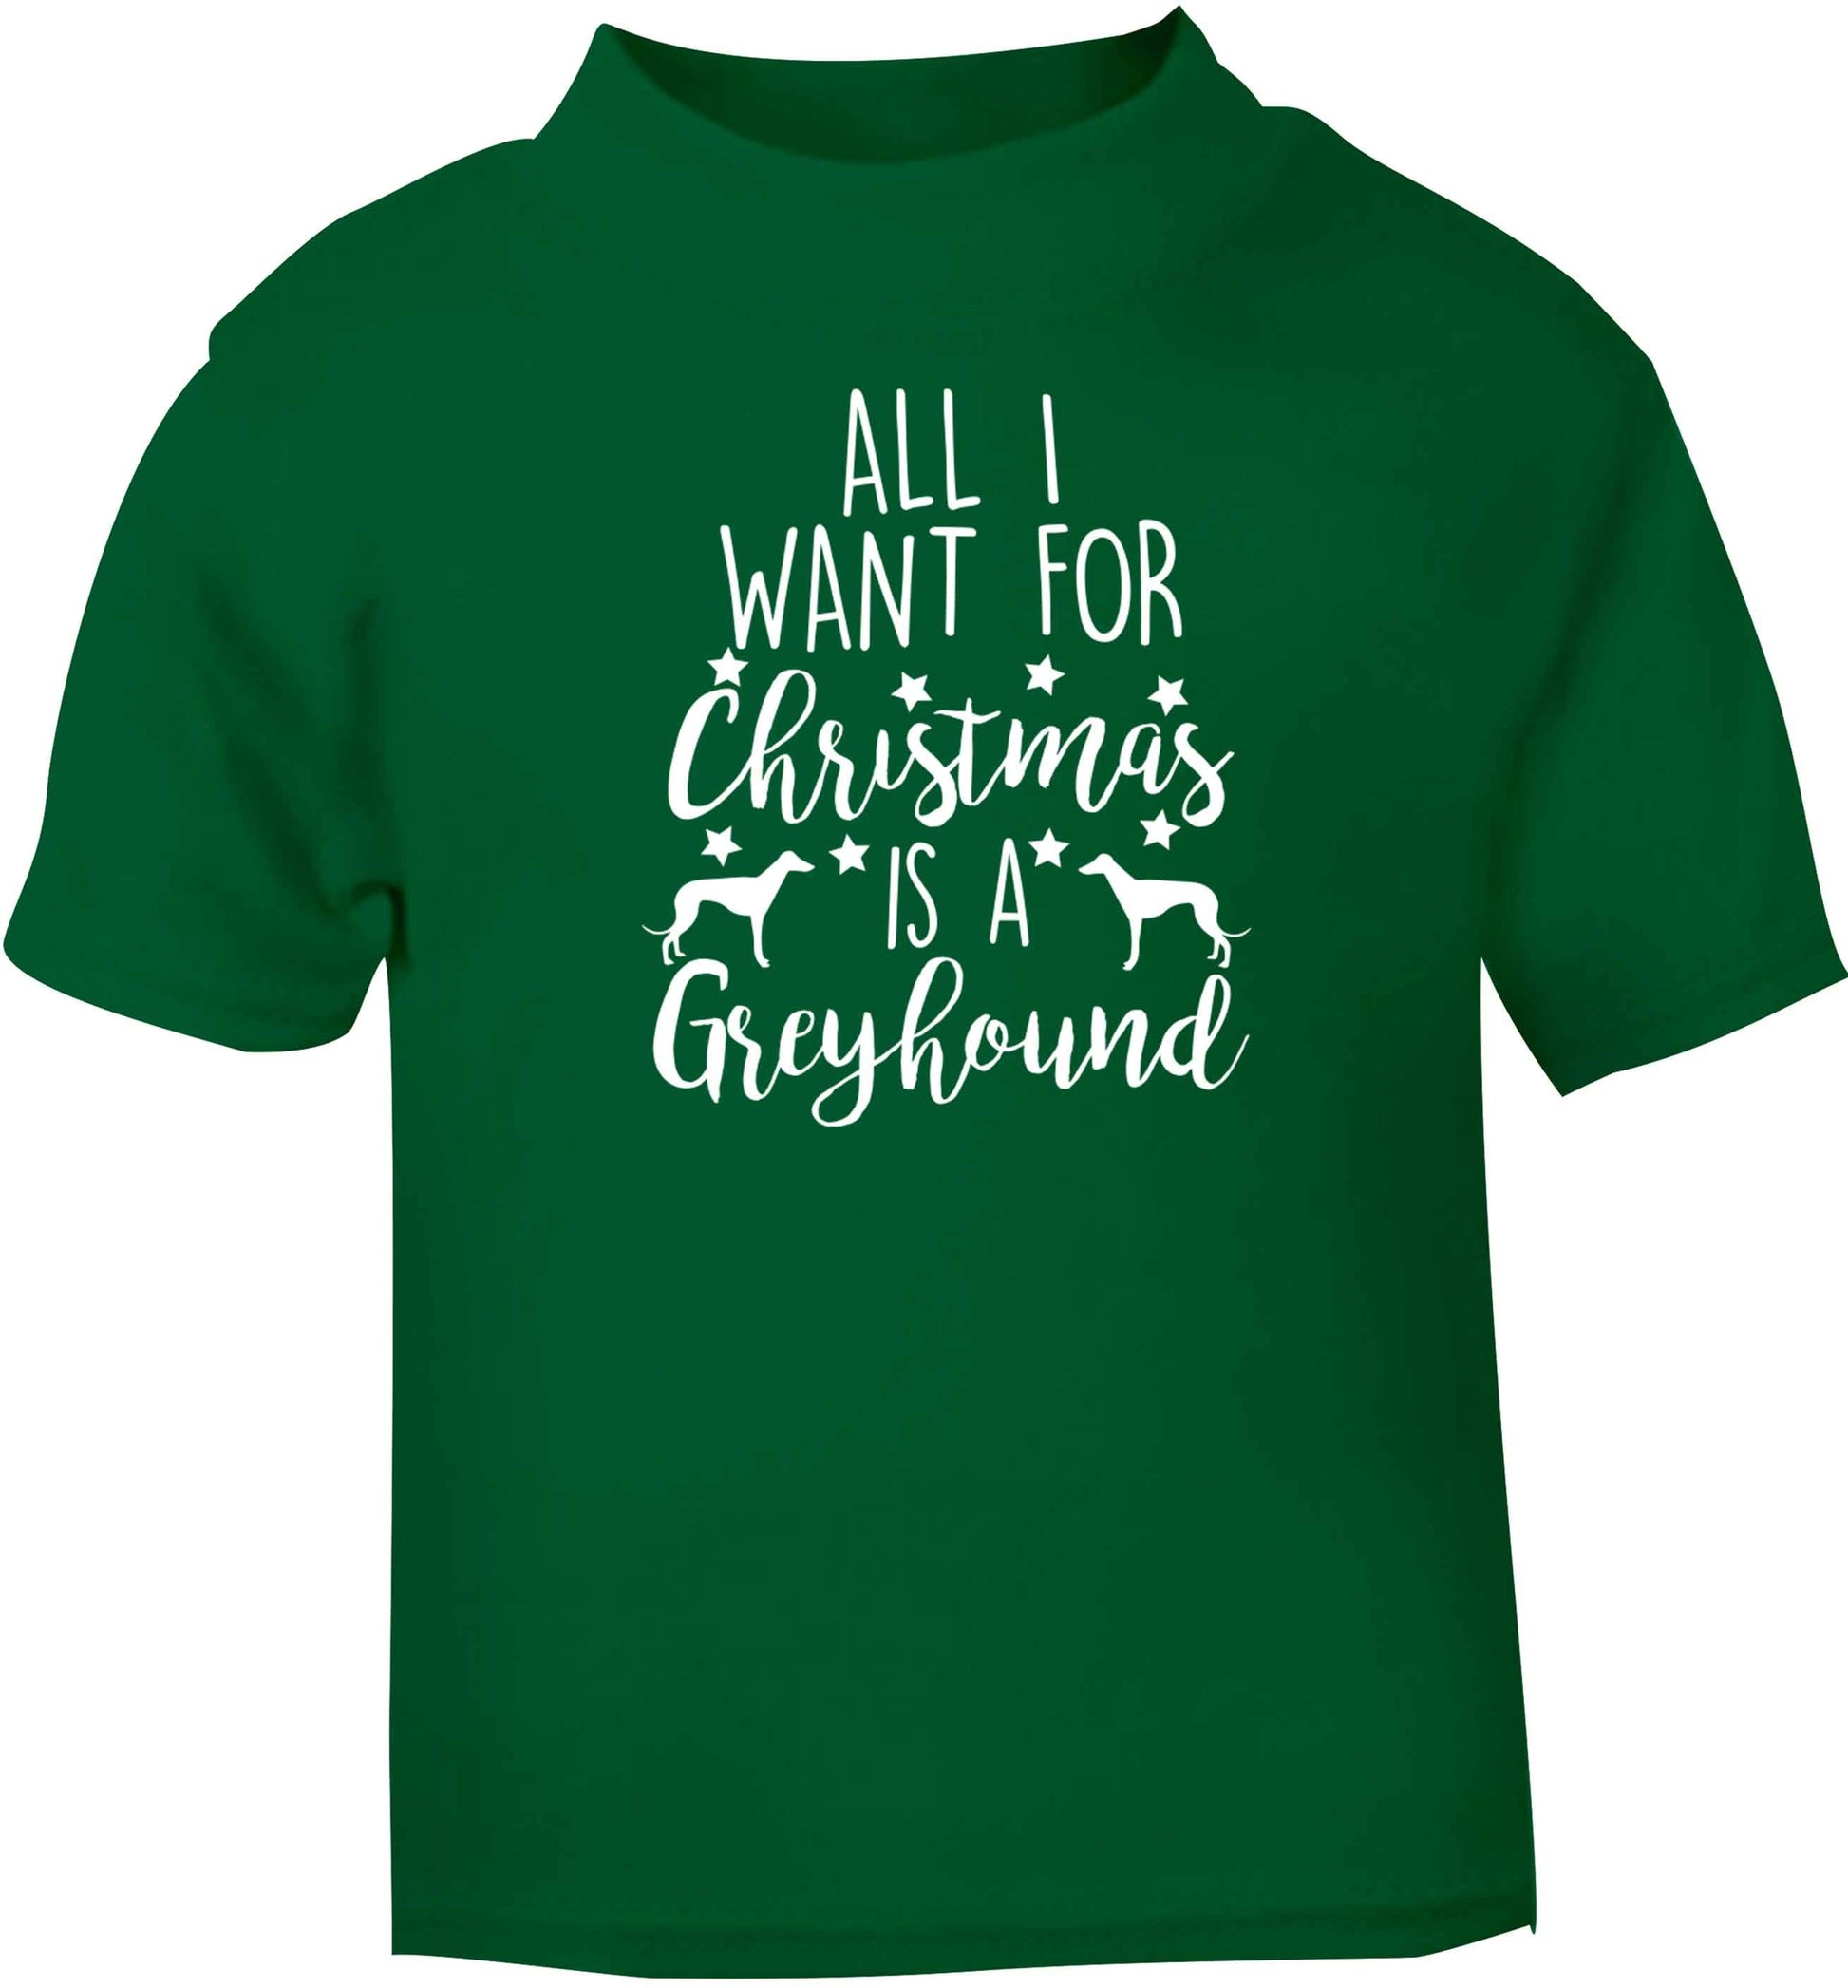 All I want for Christmas is a greyhound green baby toddler Tshirt 2 Years